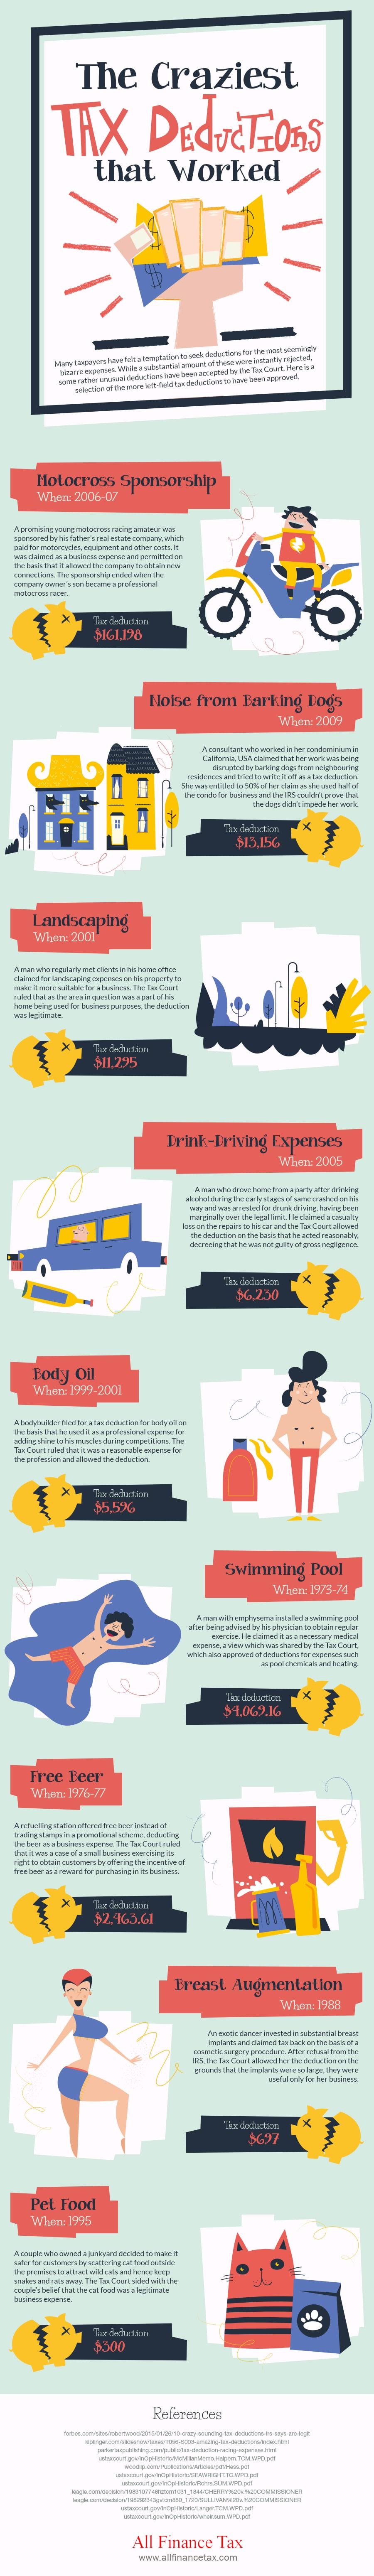 The Craziest Tax Deductions That Worked #infographic